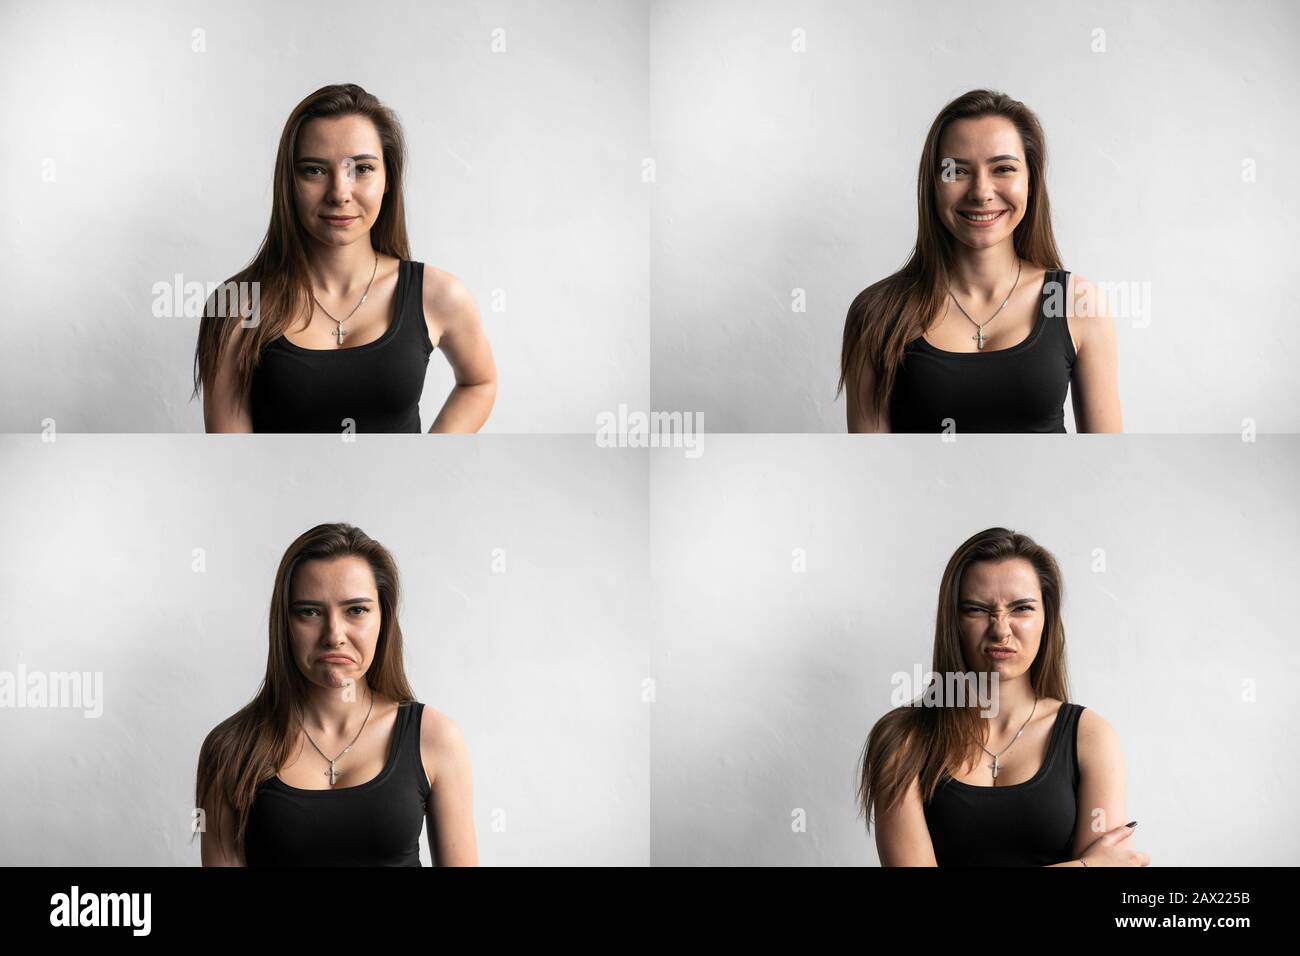 Set of young woman's portraits with different emotions. Young beautiful cute girl showing different emotions. Laughing, smiling, anger, suspicion Stock Photo